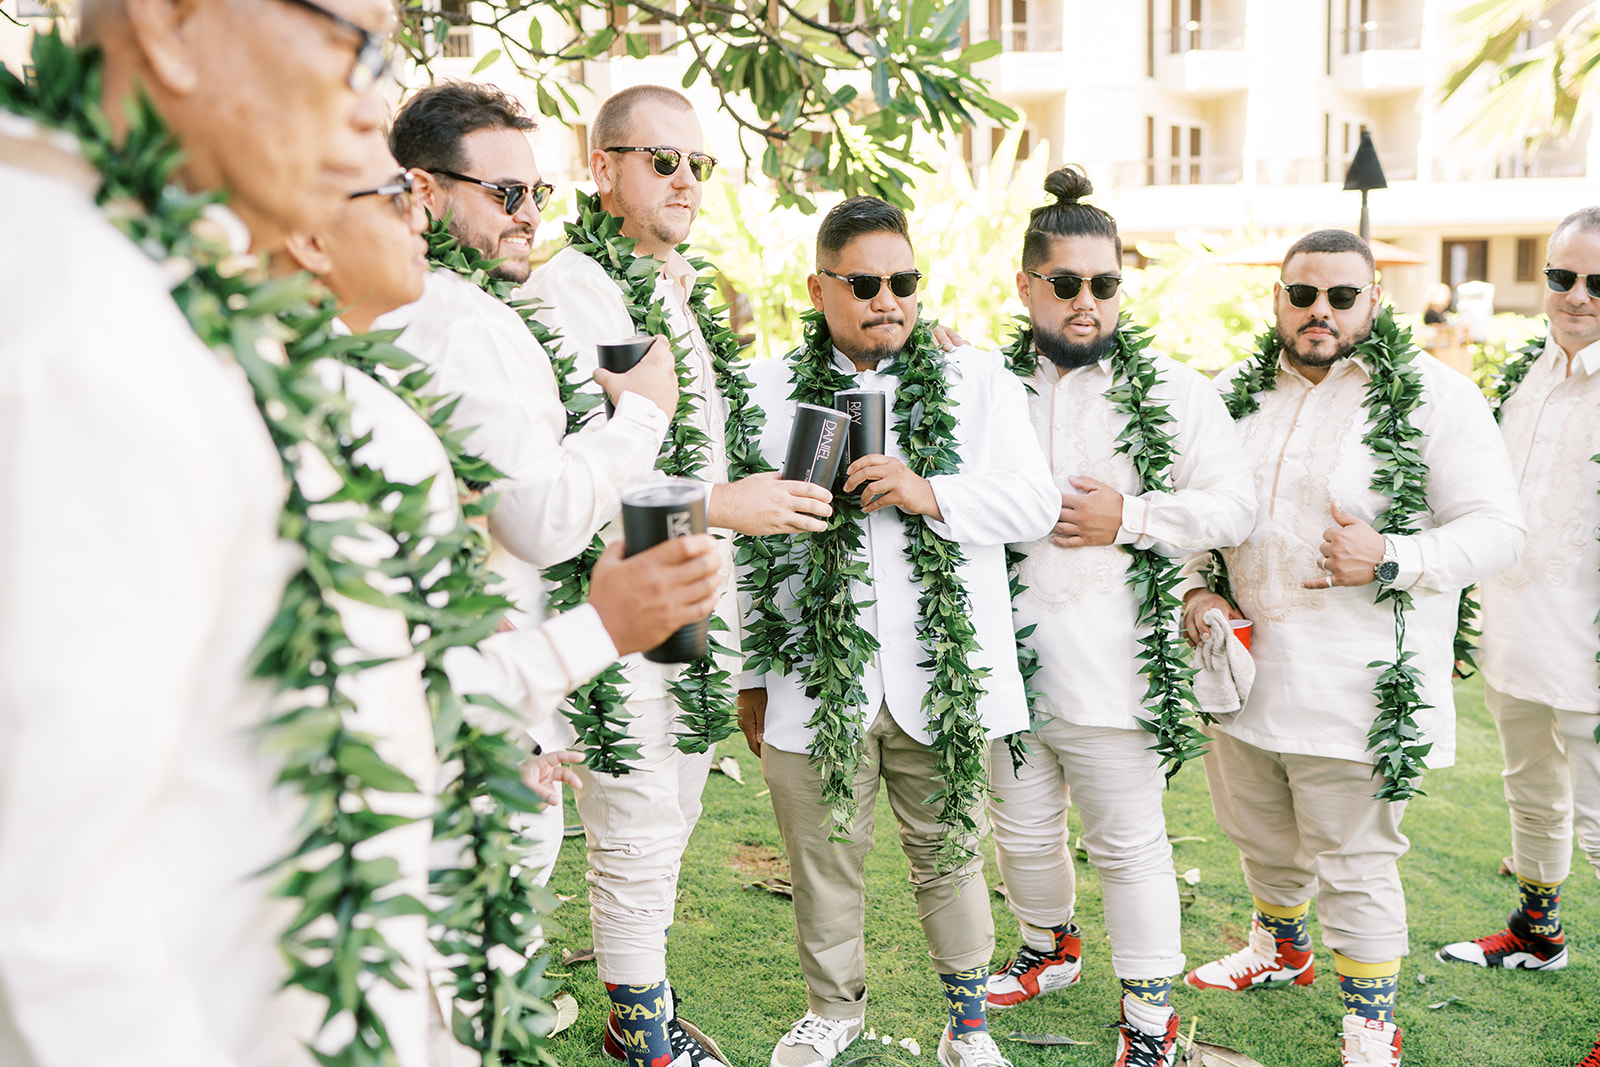 A group of men dressed in white shirts and beige pants with green leis, some wearing sunglasses, at wedding ceremony